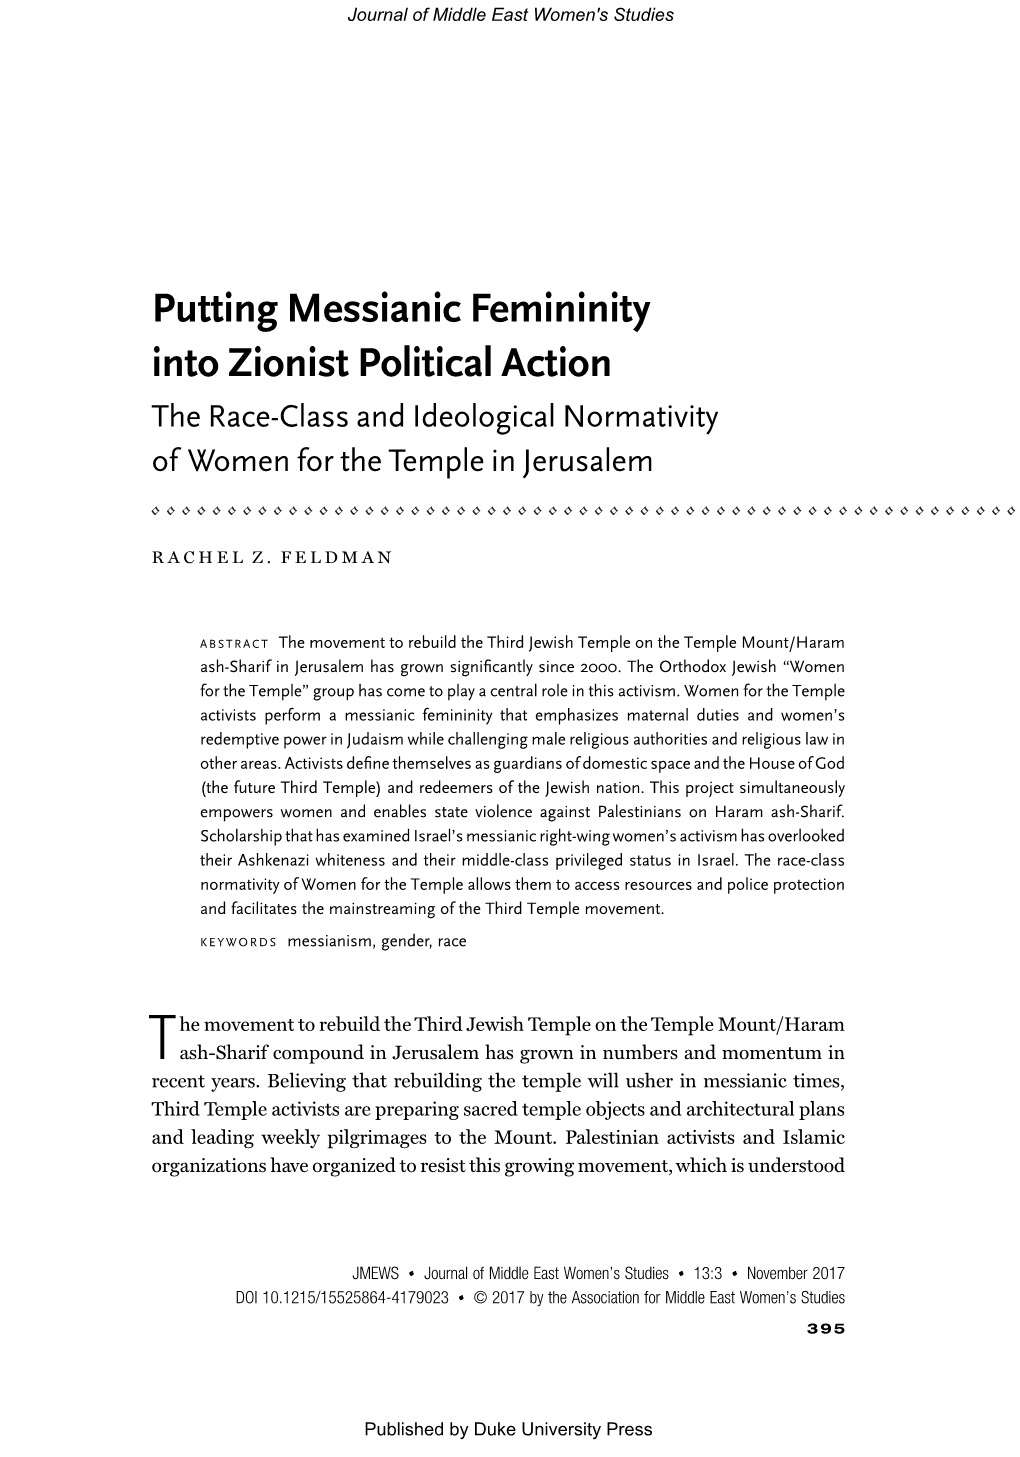 Putting Messianic Femininity Into Zionist Political Action the Race-Class and Ideological Normativity of Women for the Temple in Jerusalem